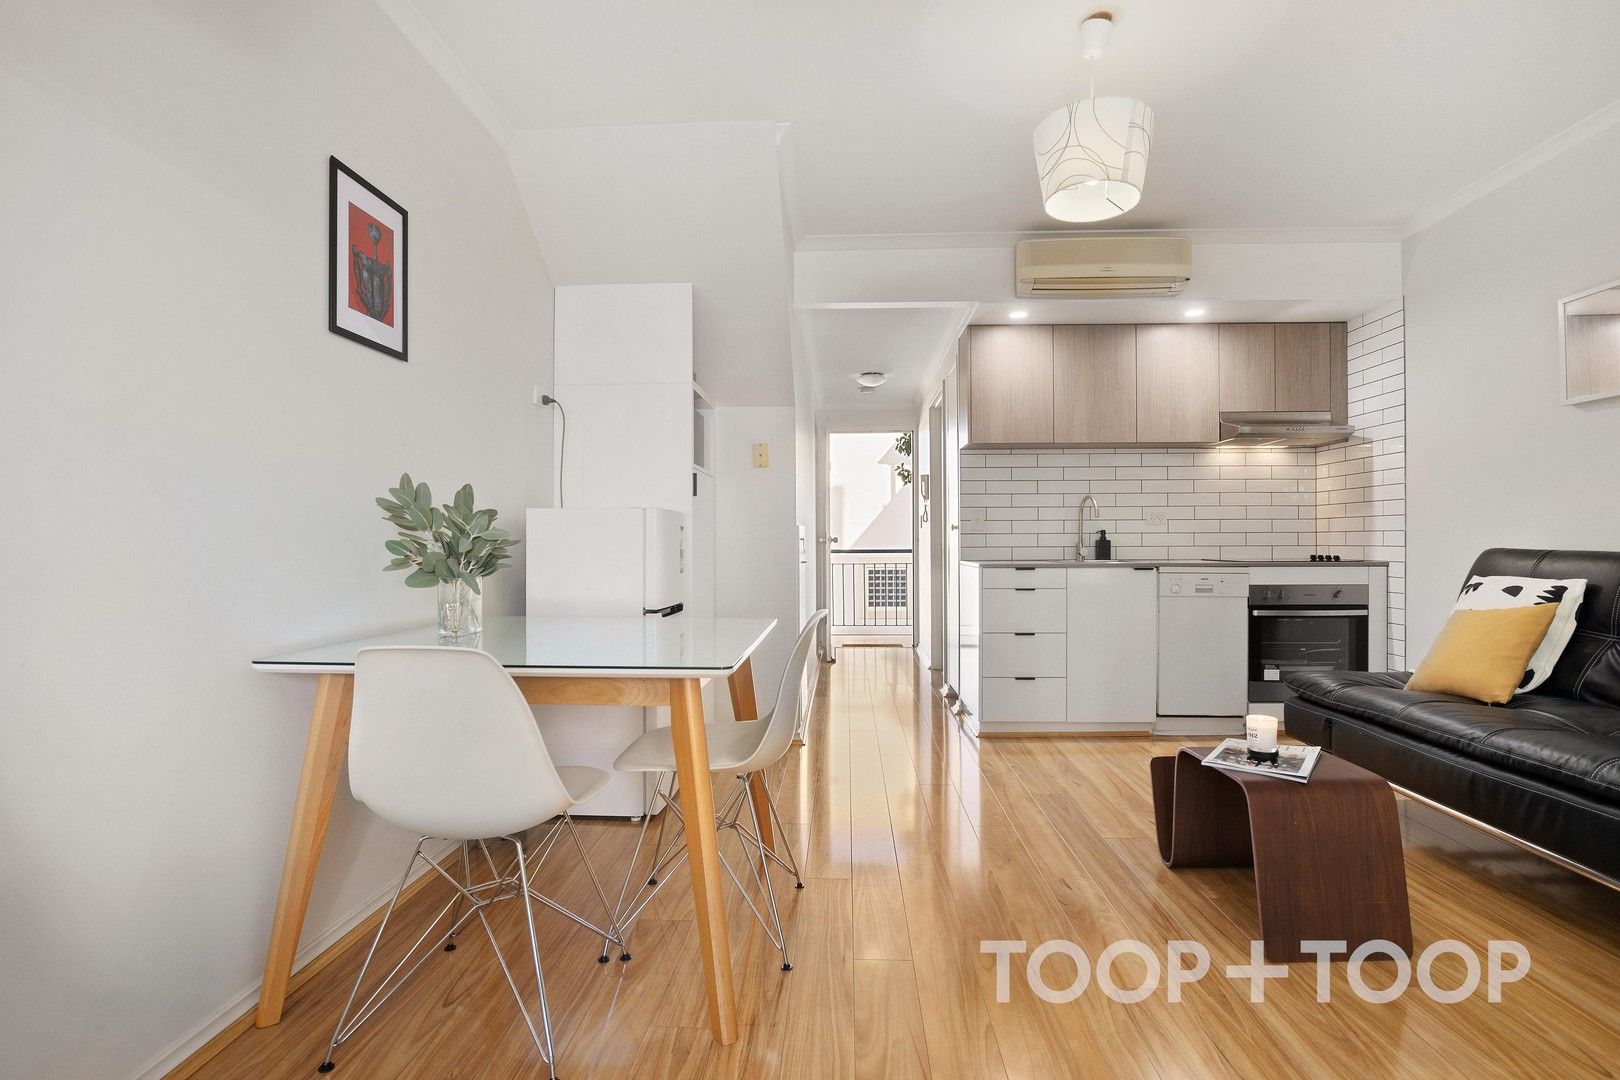 1 bedrooms Apartment / Unit / Flat in 6/81 Melbourne Street NORTH ADELAIDE SA, 5006